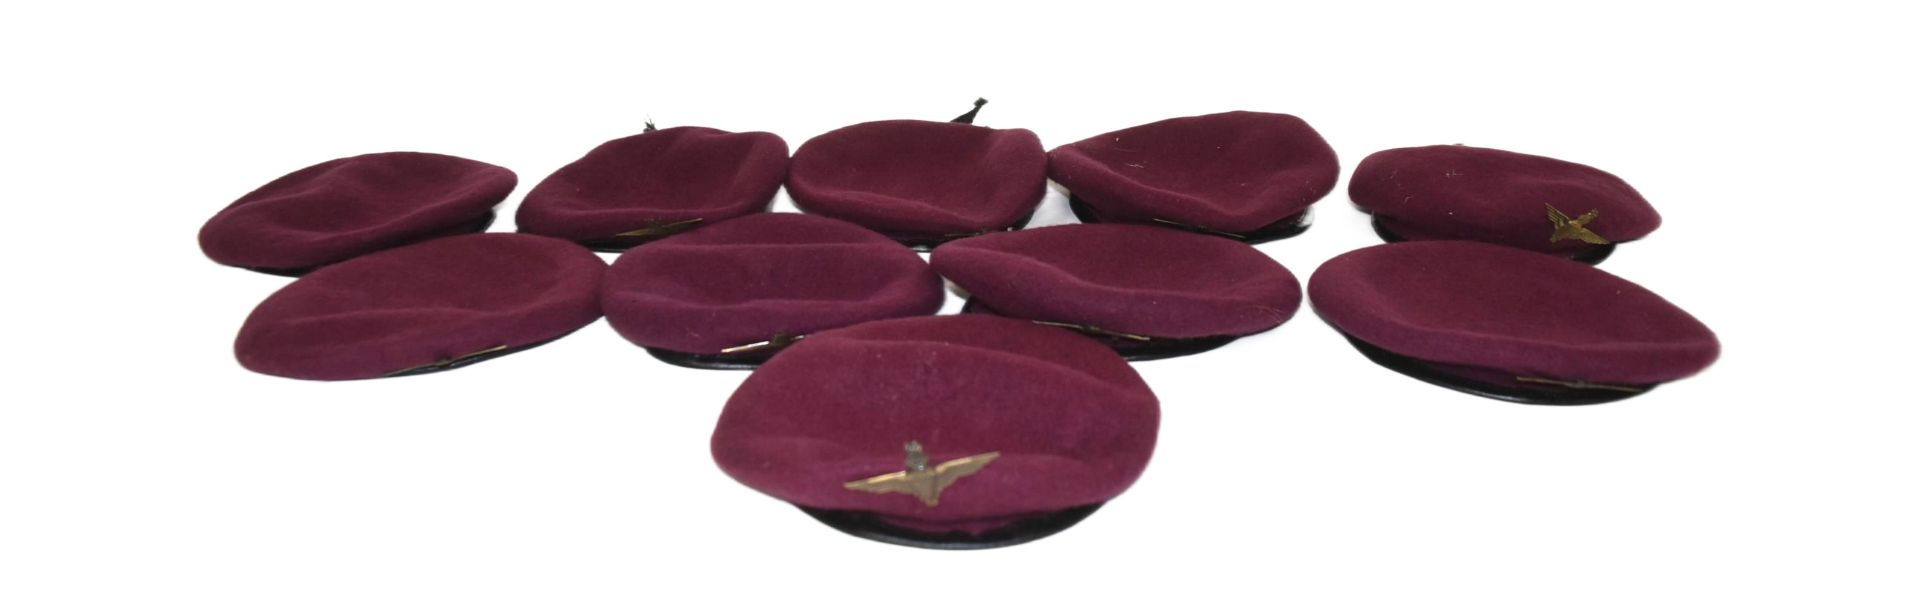 COLLECTION OF POST WAR BRITISH PARATROOPER BERETS